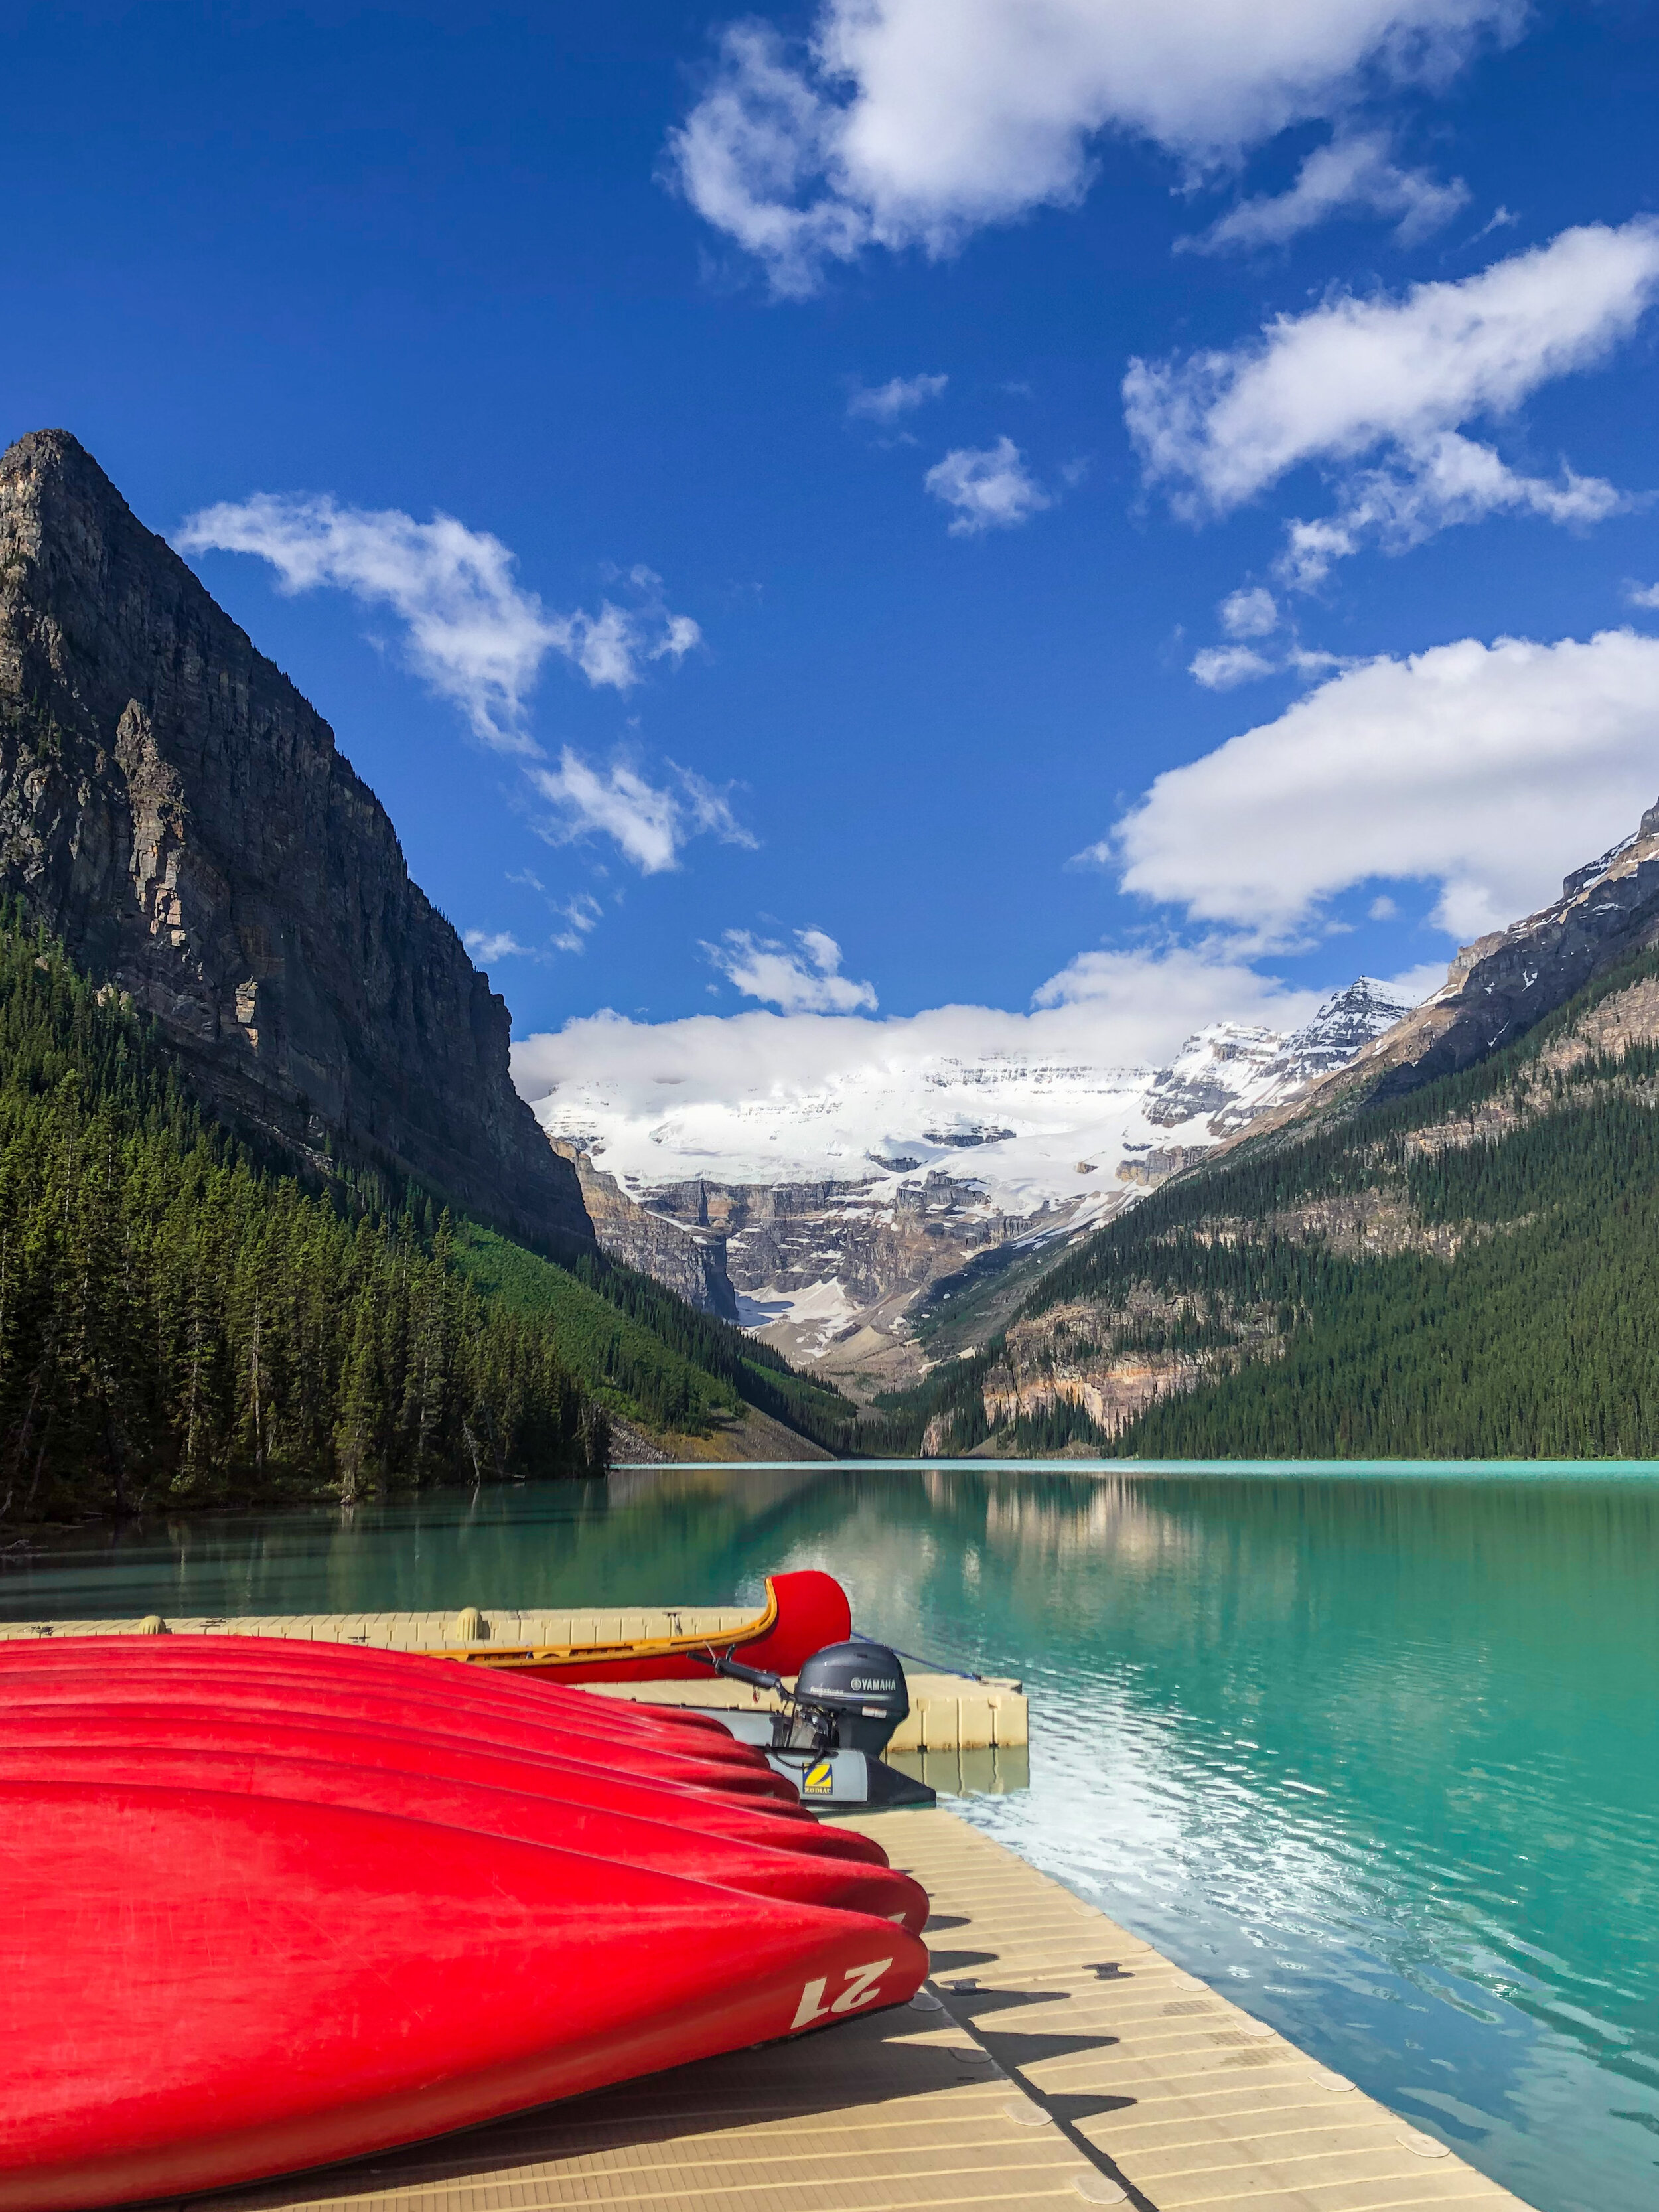 8 Best Things To Do At Lake Louise In Summer - CHARLIES WANDERINGS